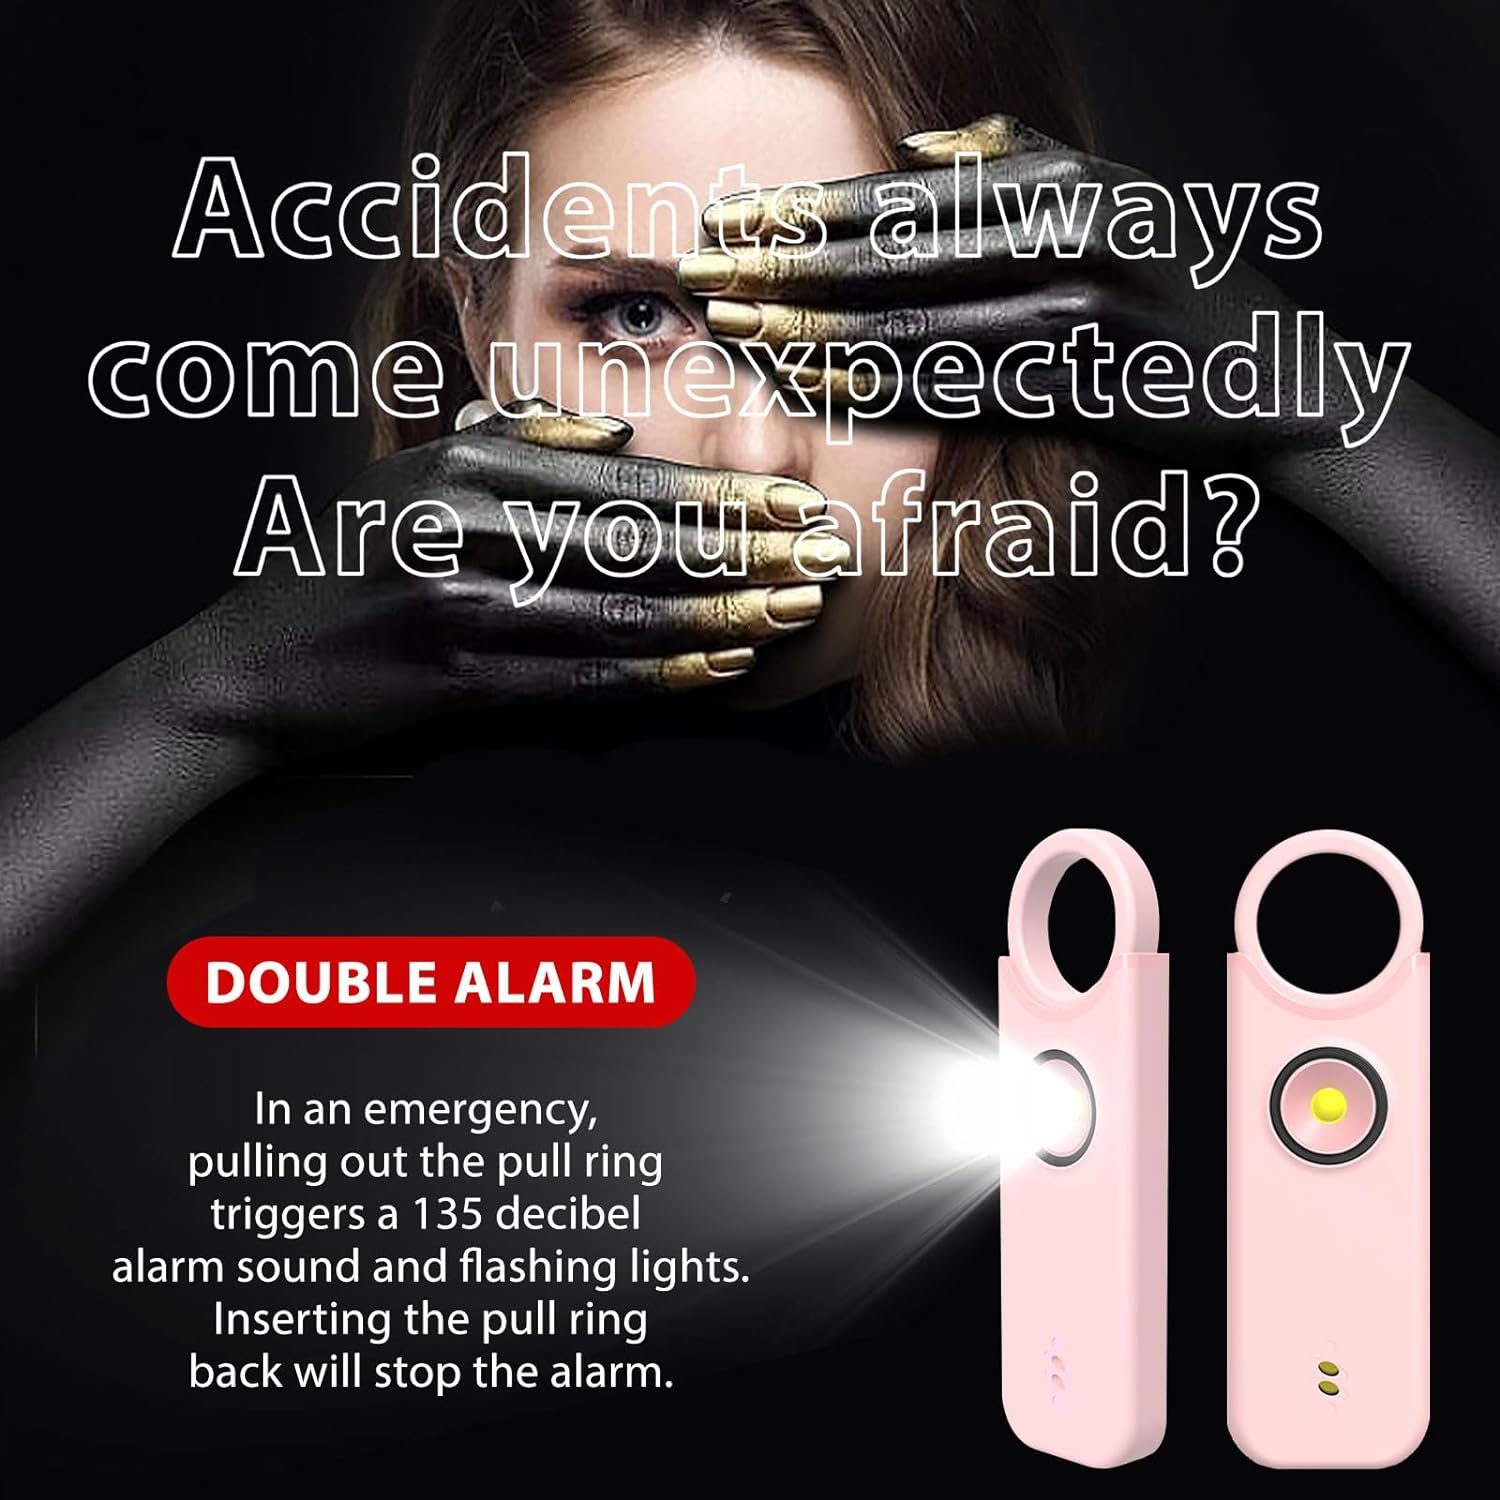 ARPHTYL Self Defense Keychain for Women Personal Safety Alarm Rechargeable Security Siren Protection Devices Panic Buttons Emergency 135db Strobe Light Upgraded Vibration Sensing Mode (Pink)